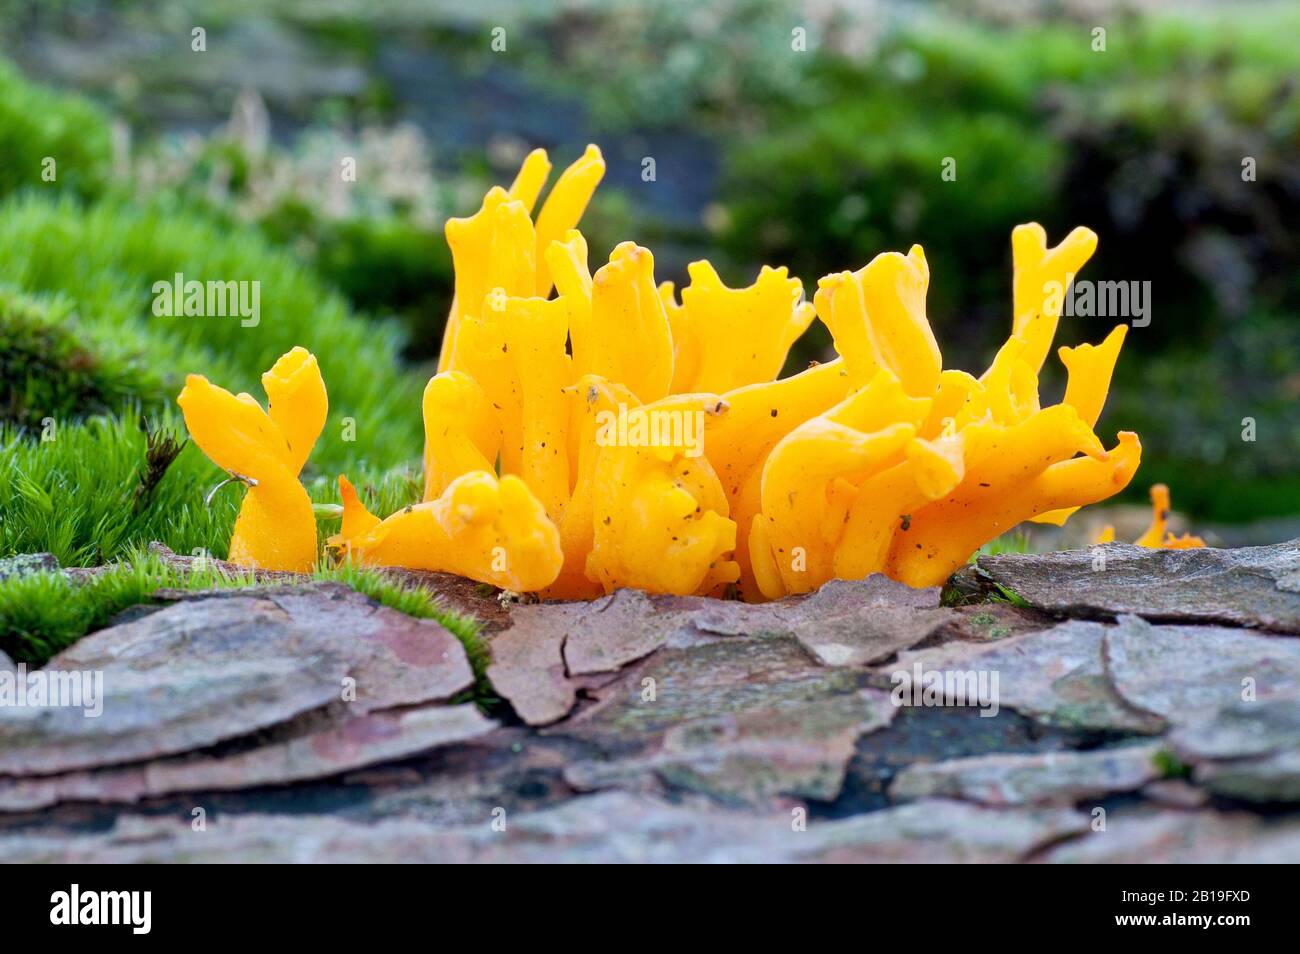 Yellow Antler fungus (calocera viscosa), close up of several fruiting bodies growing on an old log. Stock Photo